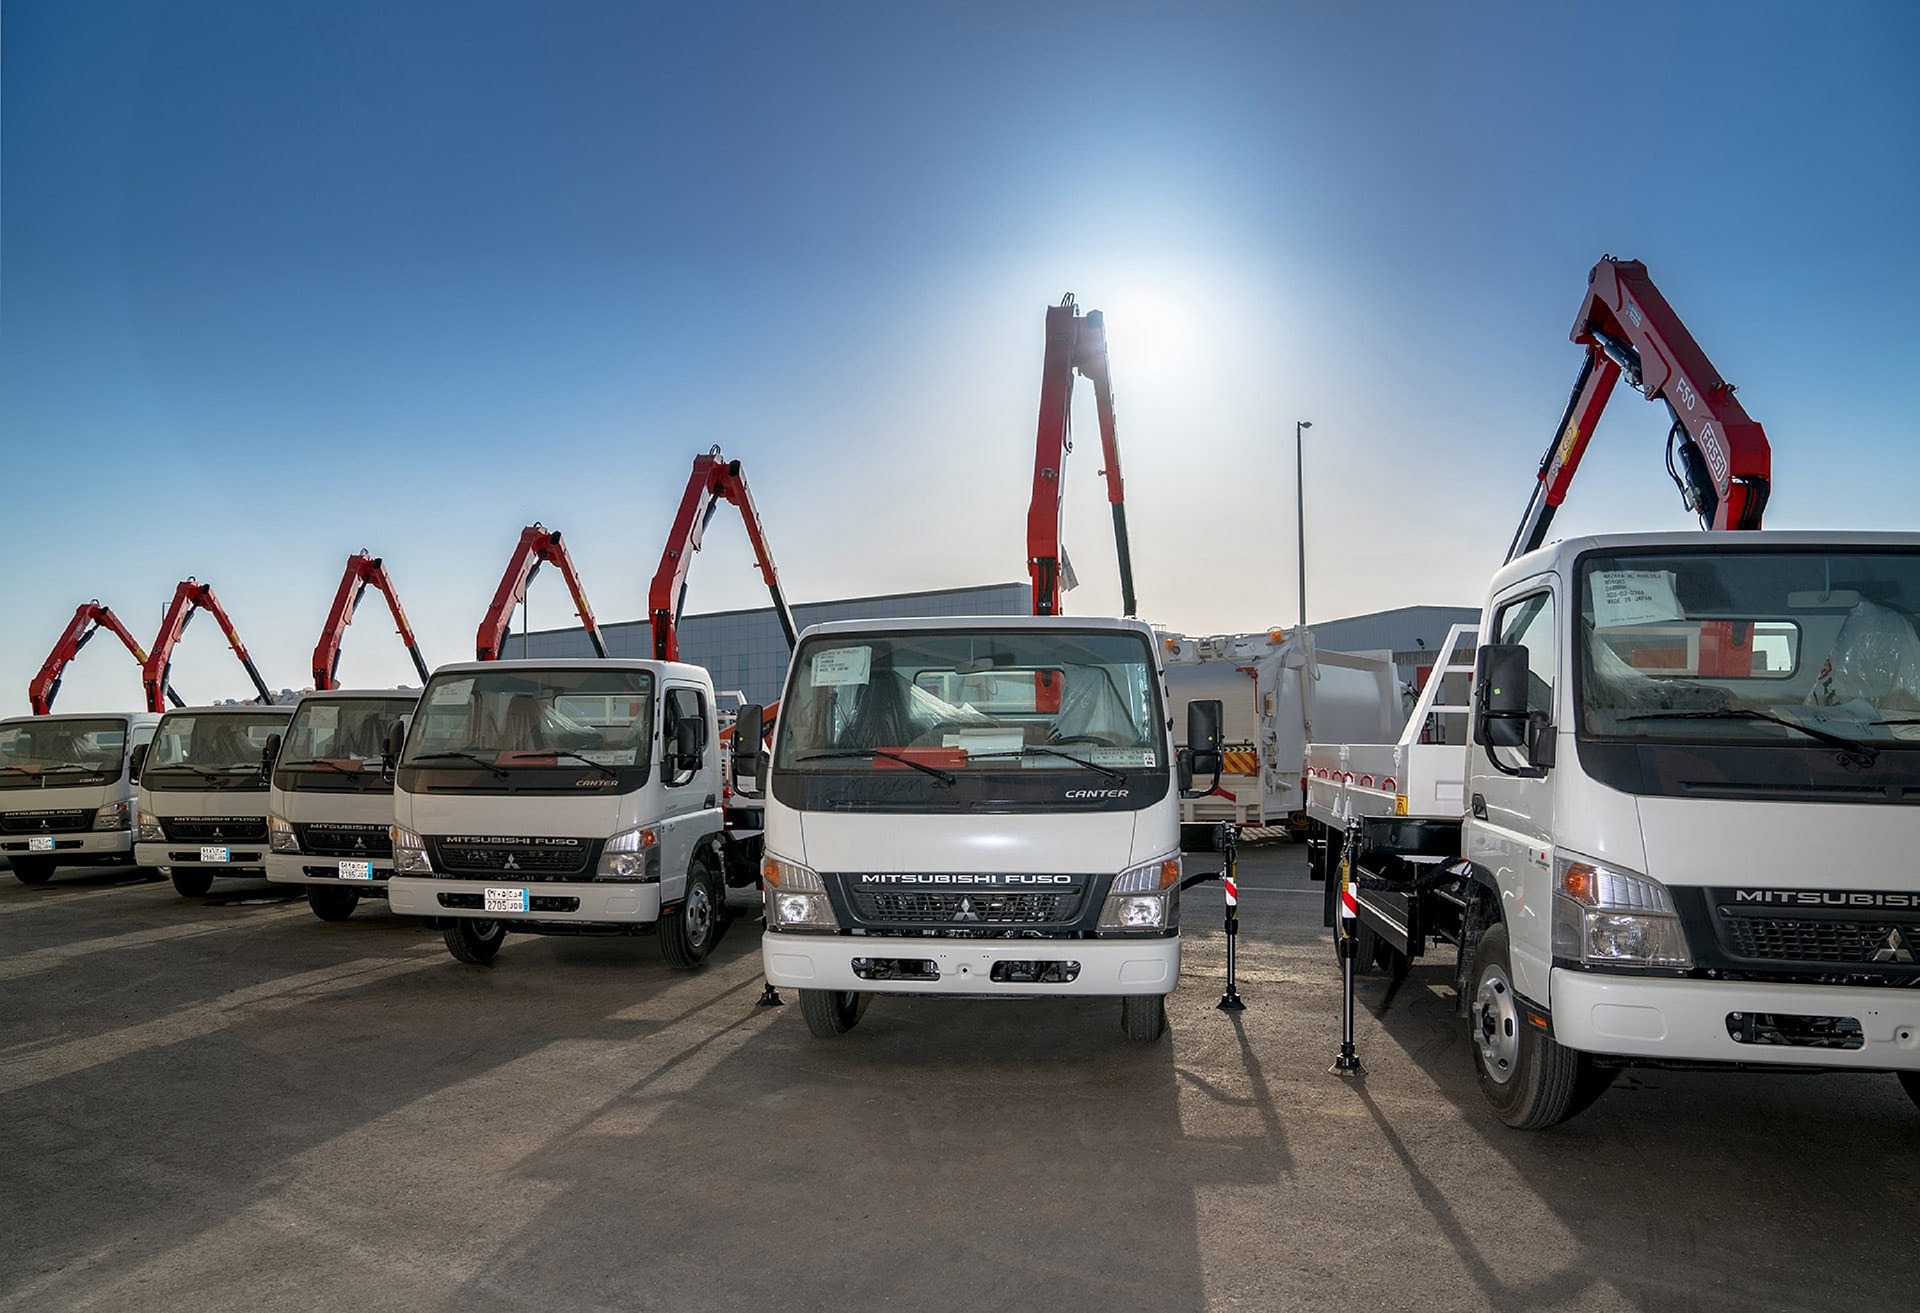 Row of white crane trucks lined up with backdrop of blue sky